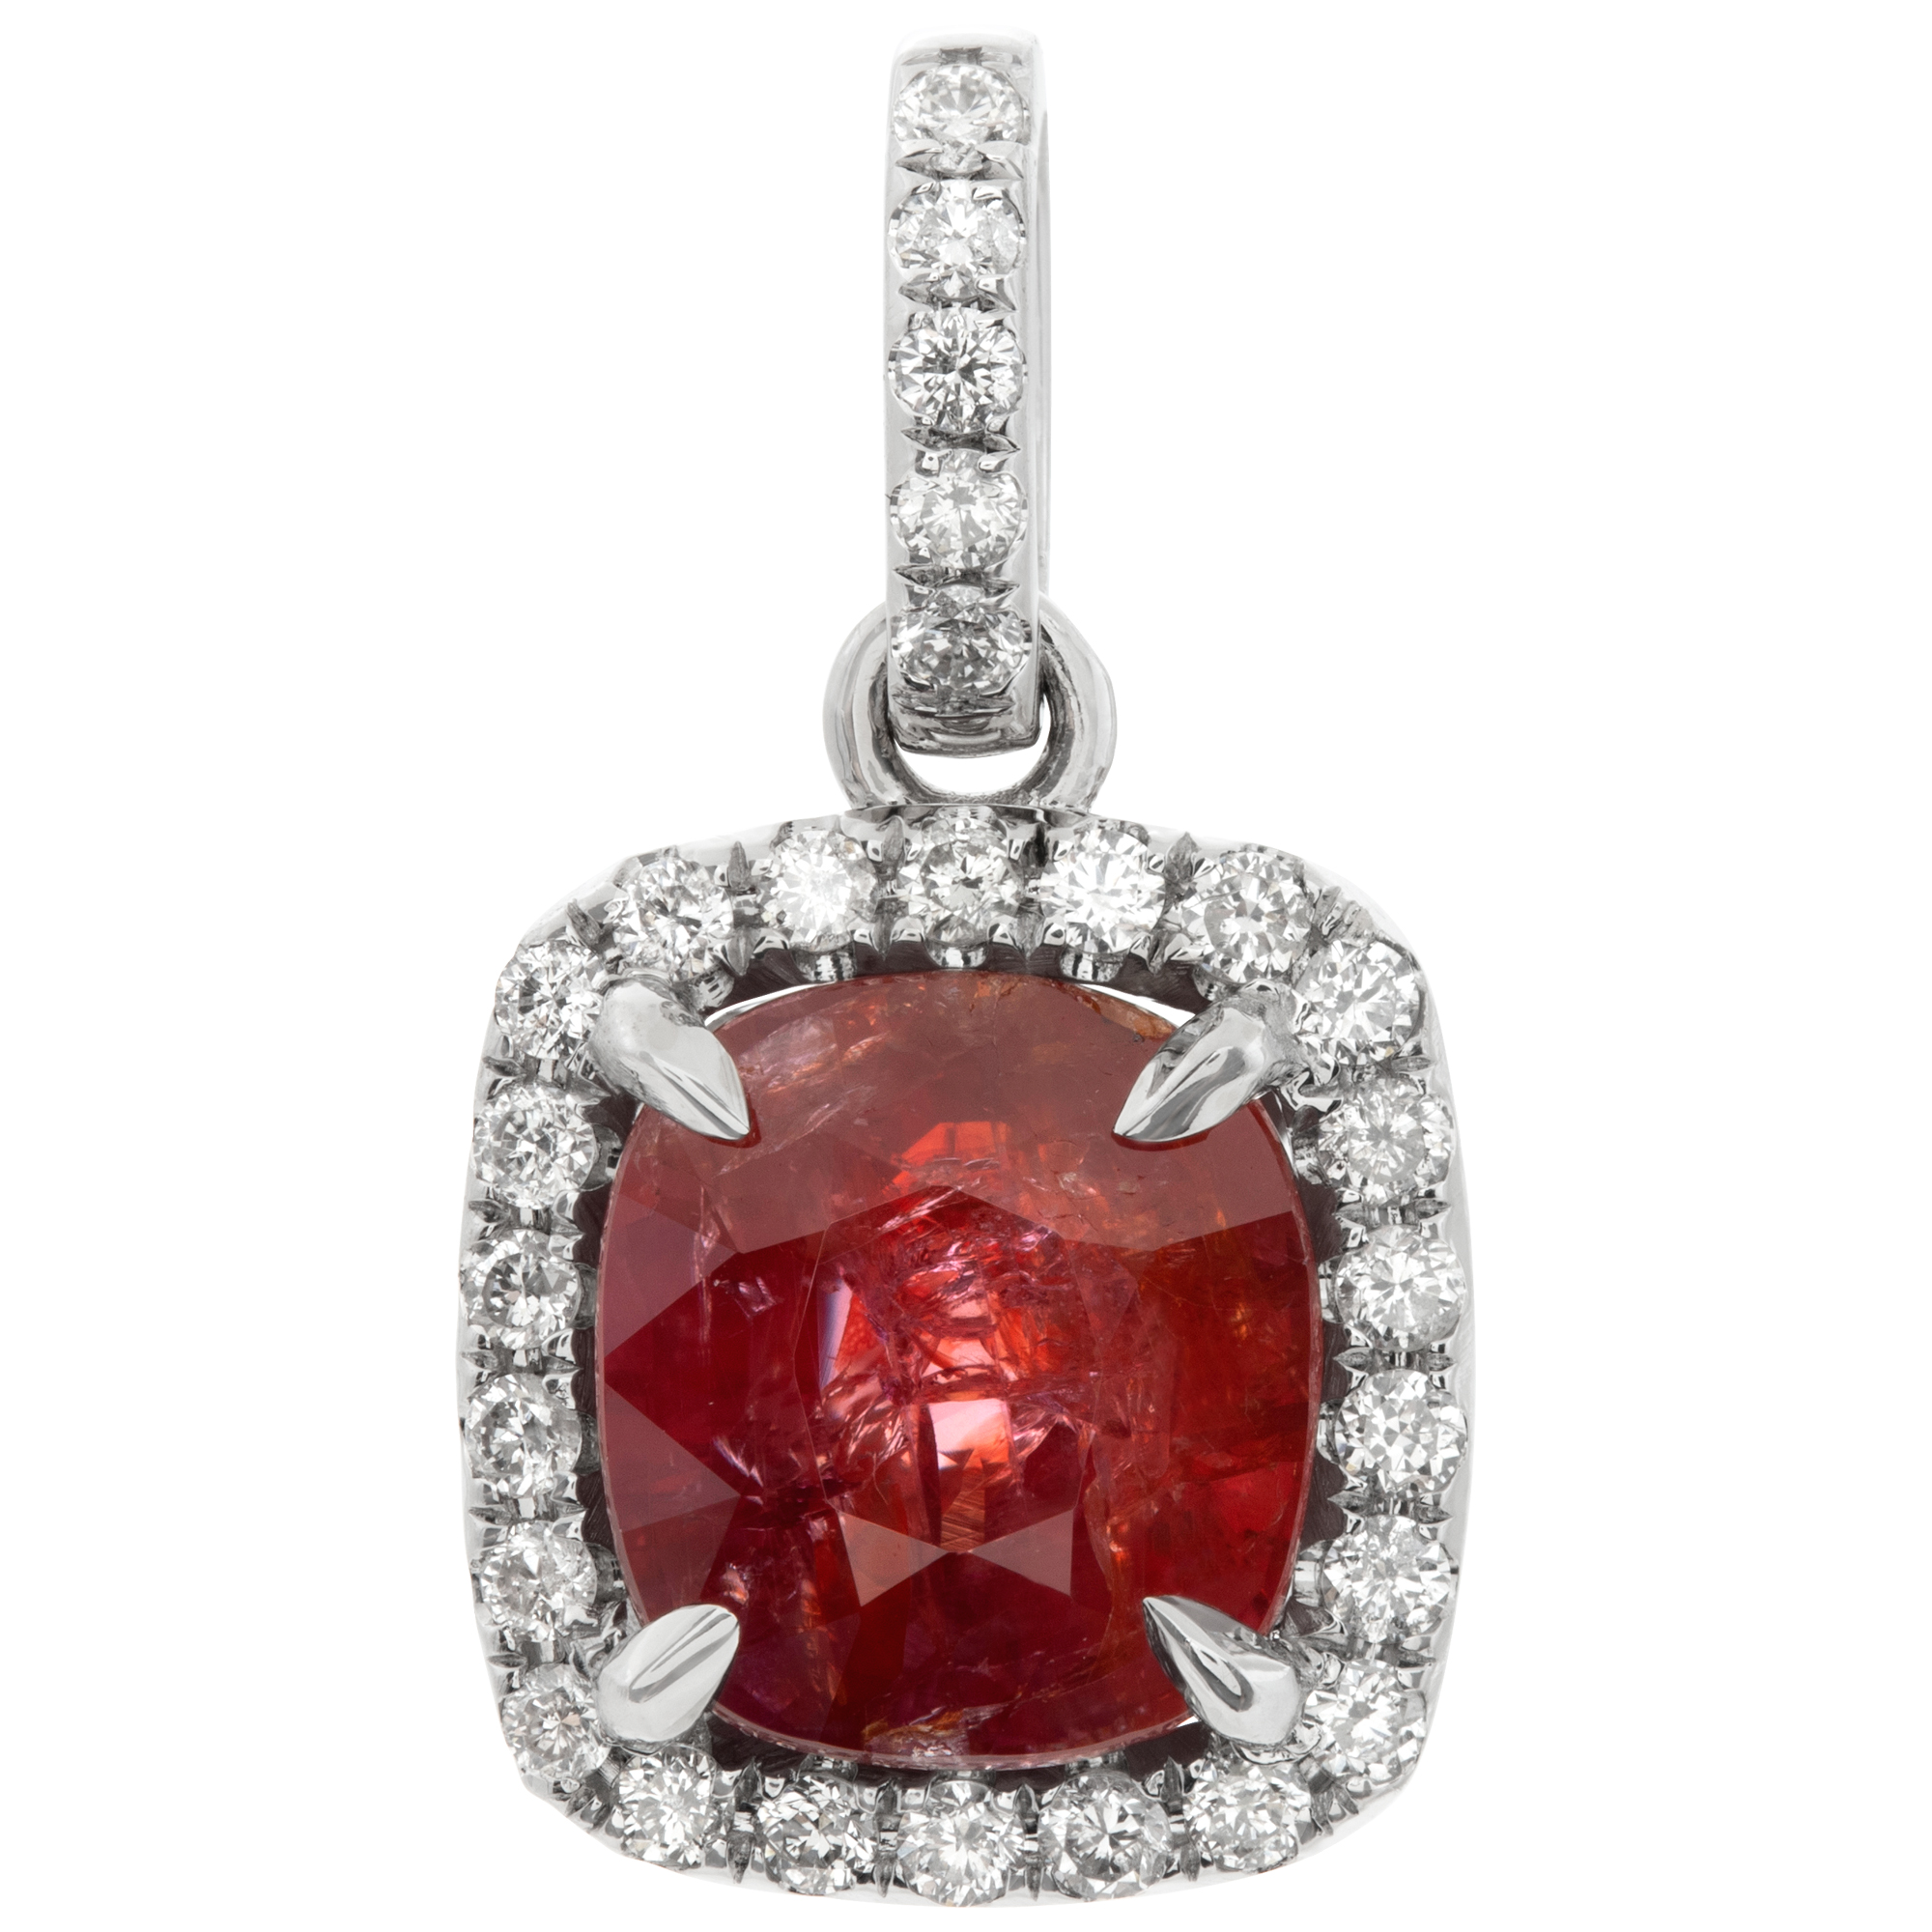 GIA certified natural red ruby cushion shape 3.03 carat pendant in 14k white gold